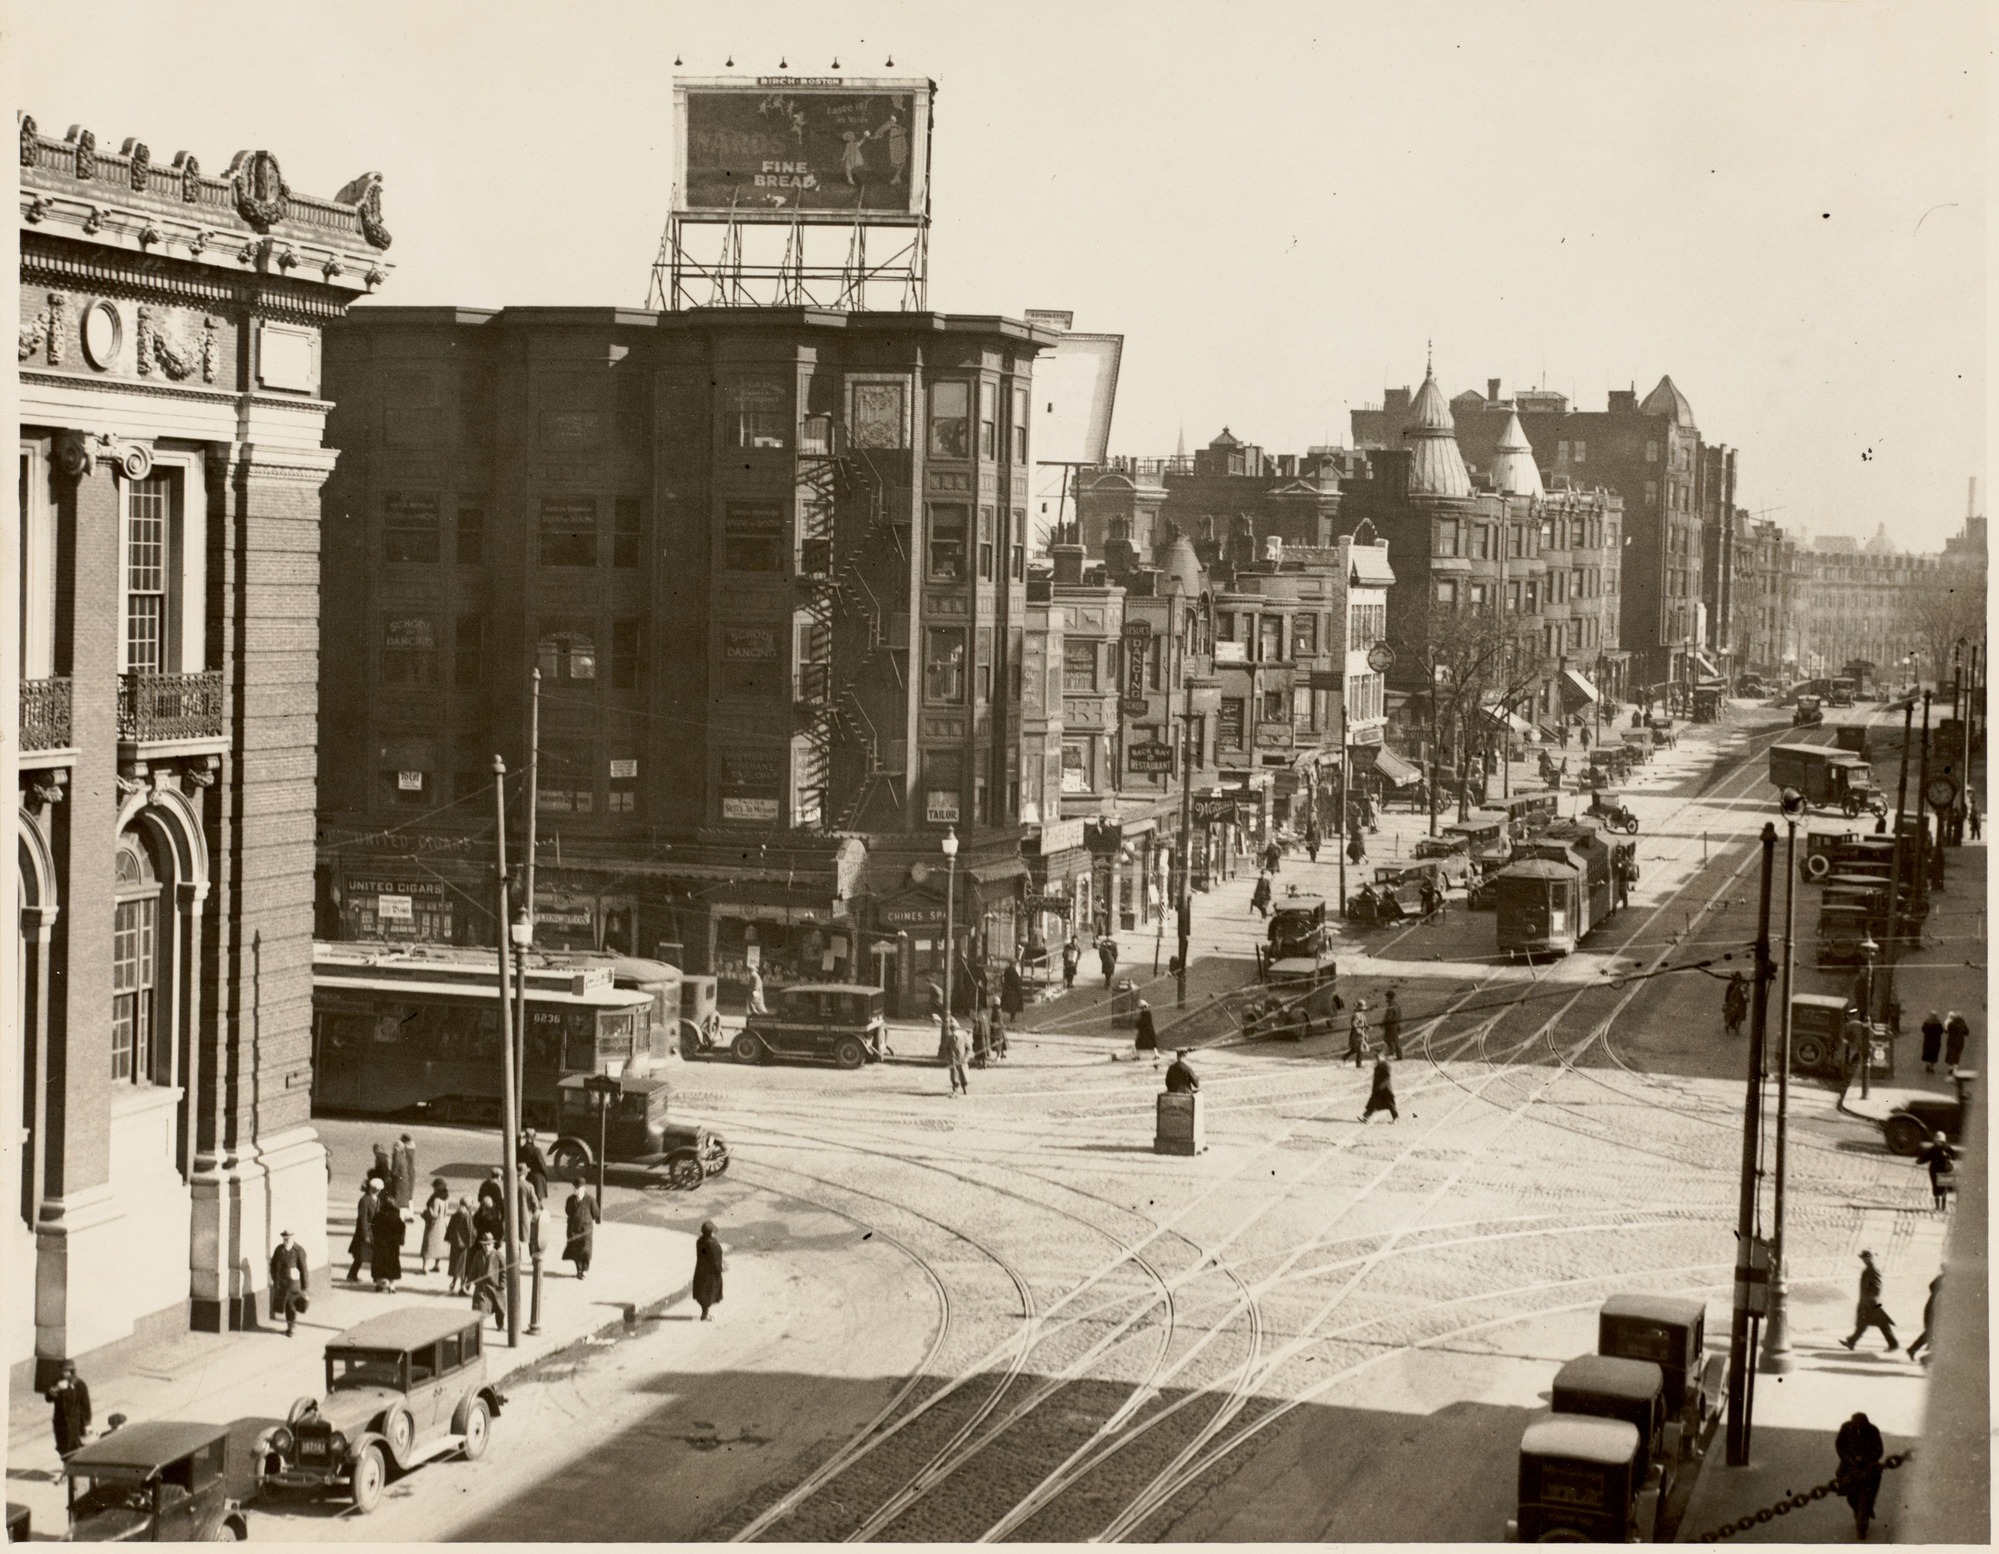 Mass. Ave. at Huntington intersection showing corner of Horticultural Hall.